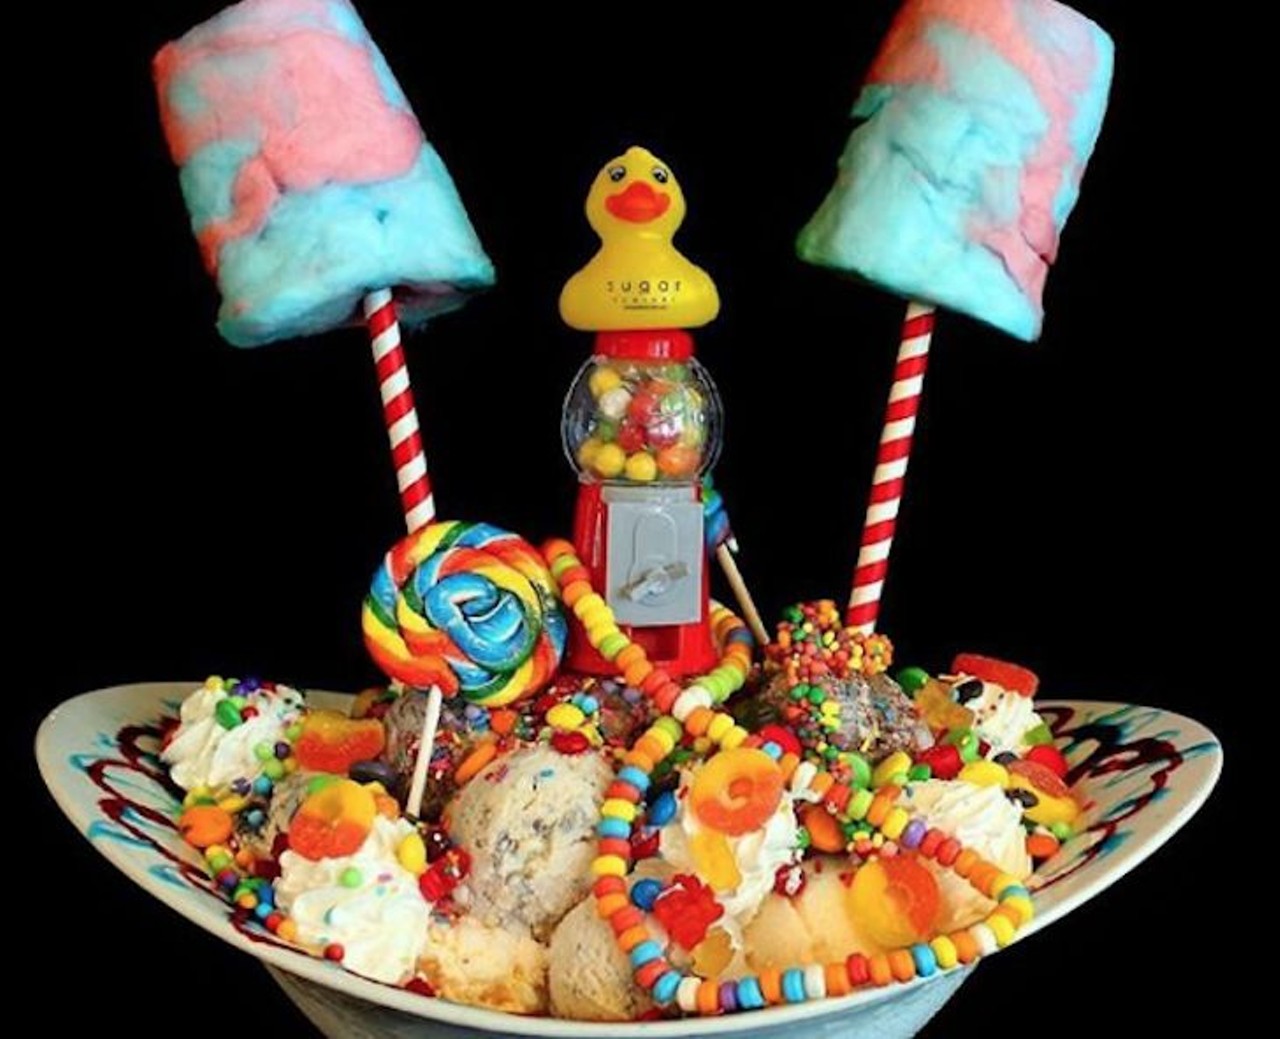 Sugar Factory
8371 International Drive 
The Sugar Factory crafts a large variety of unique sweet treats including the World Famous King Kong Sundae with 24 scoops of ice cream that feeds up to 12 people. Toppings include unicorn pops, candy necklaces and gummies.
Photo via Instagram/Sugar Factory